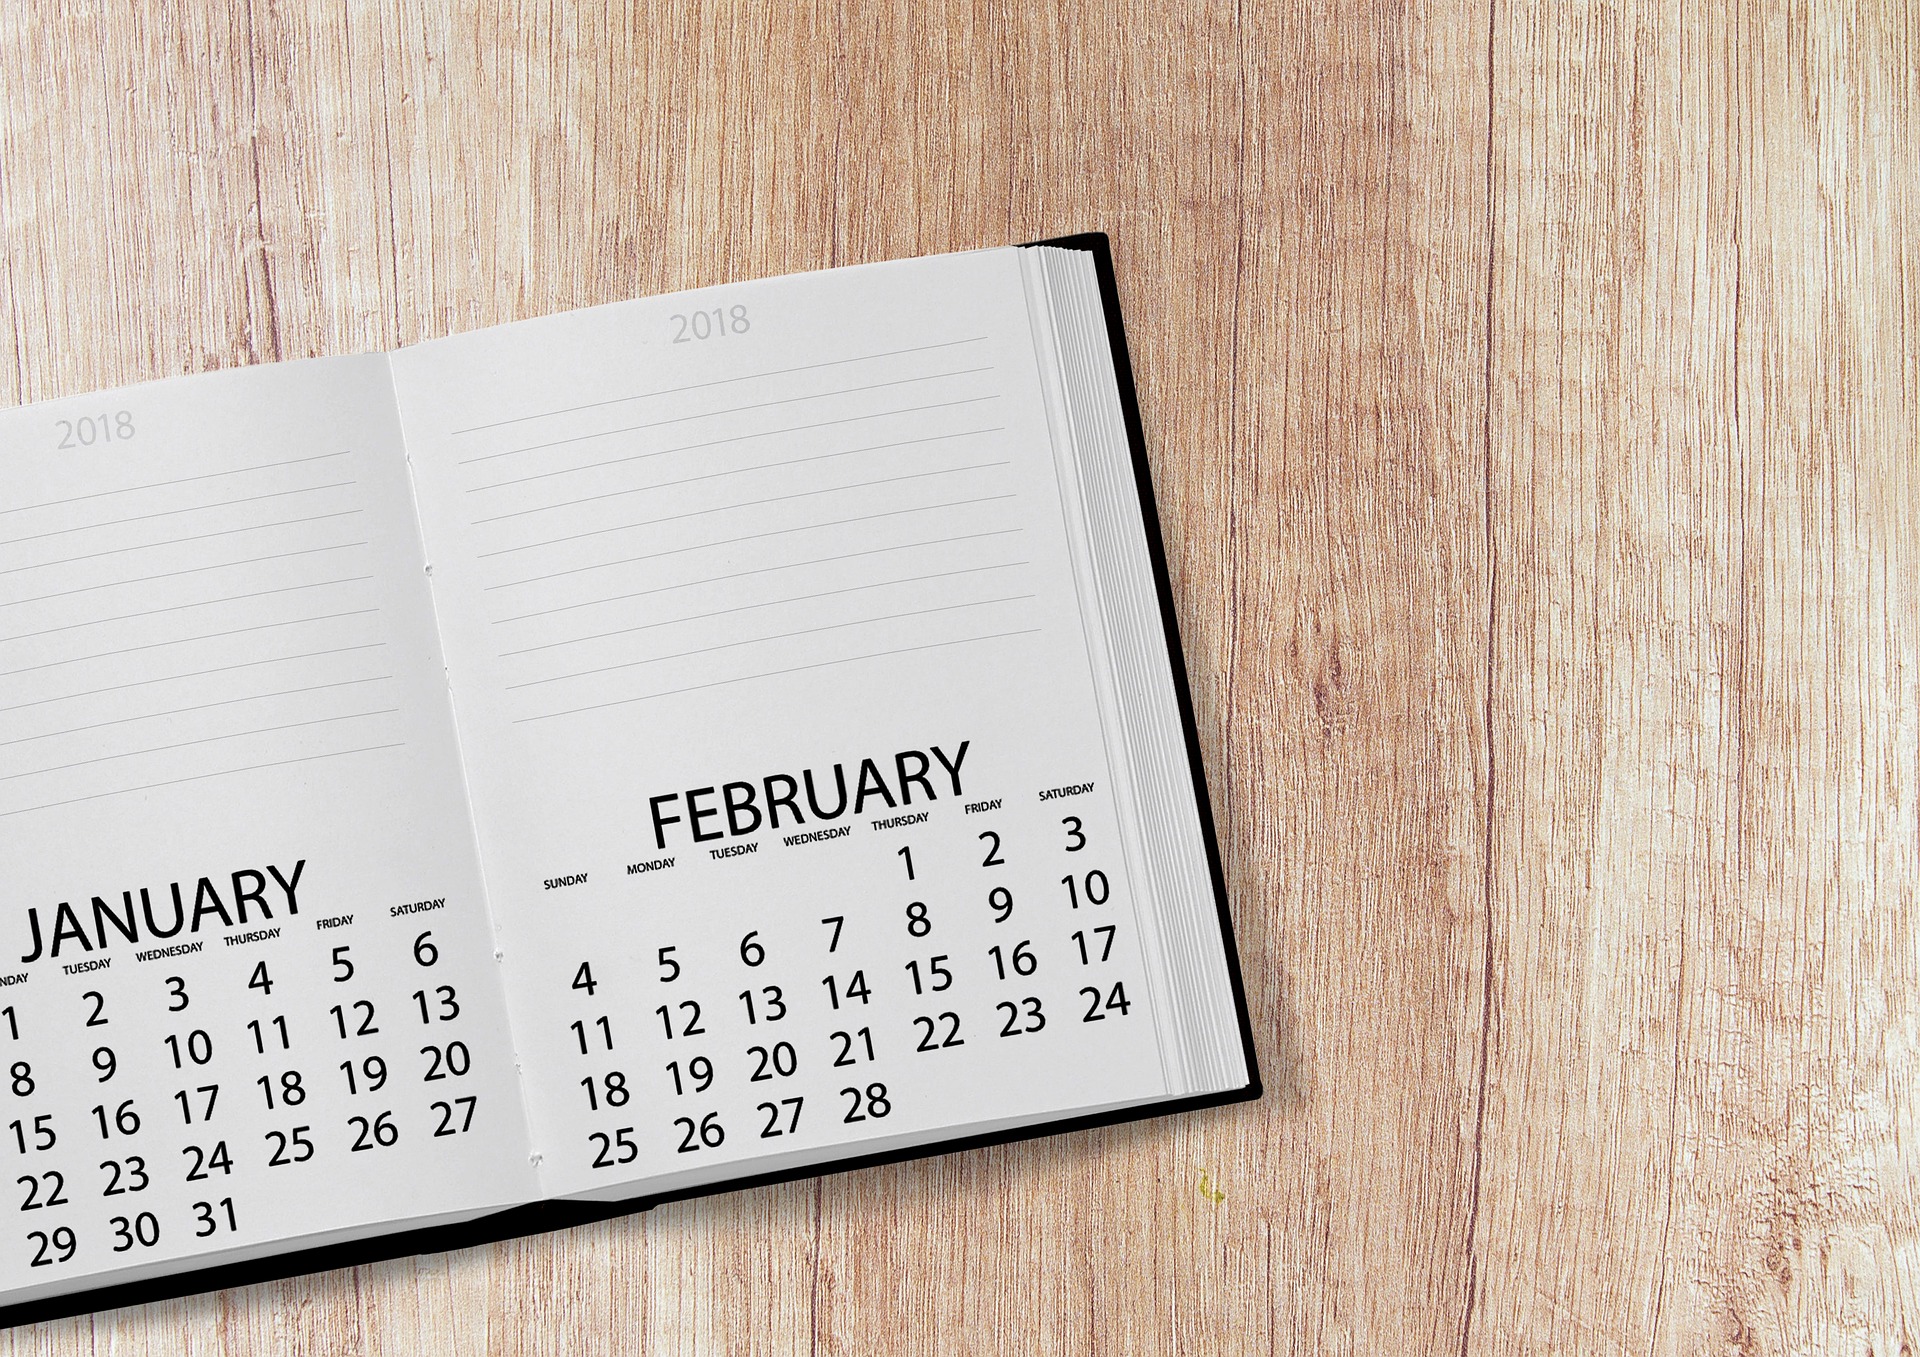 Financial aid blogger Kaitlyn Keech shares important dates to note for 2018.